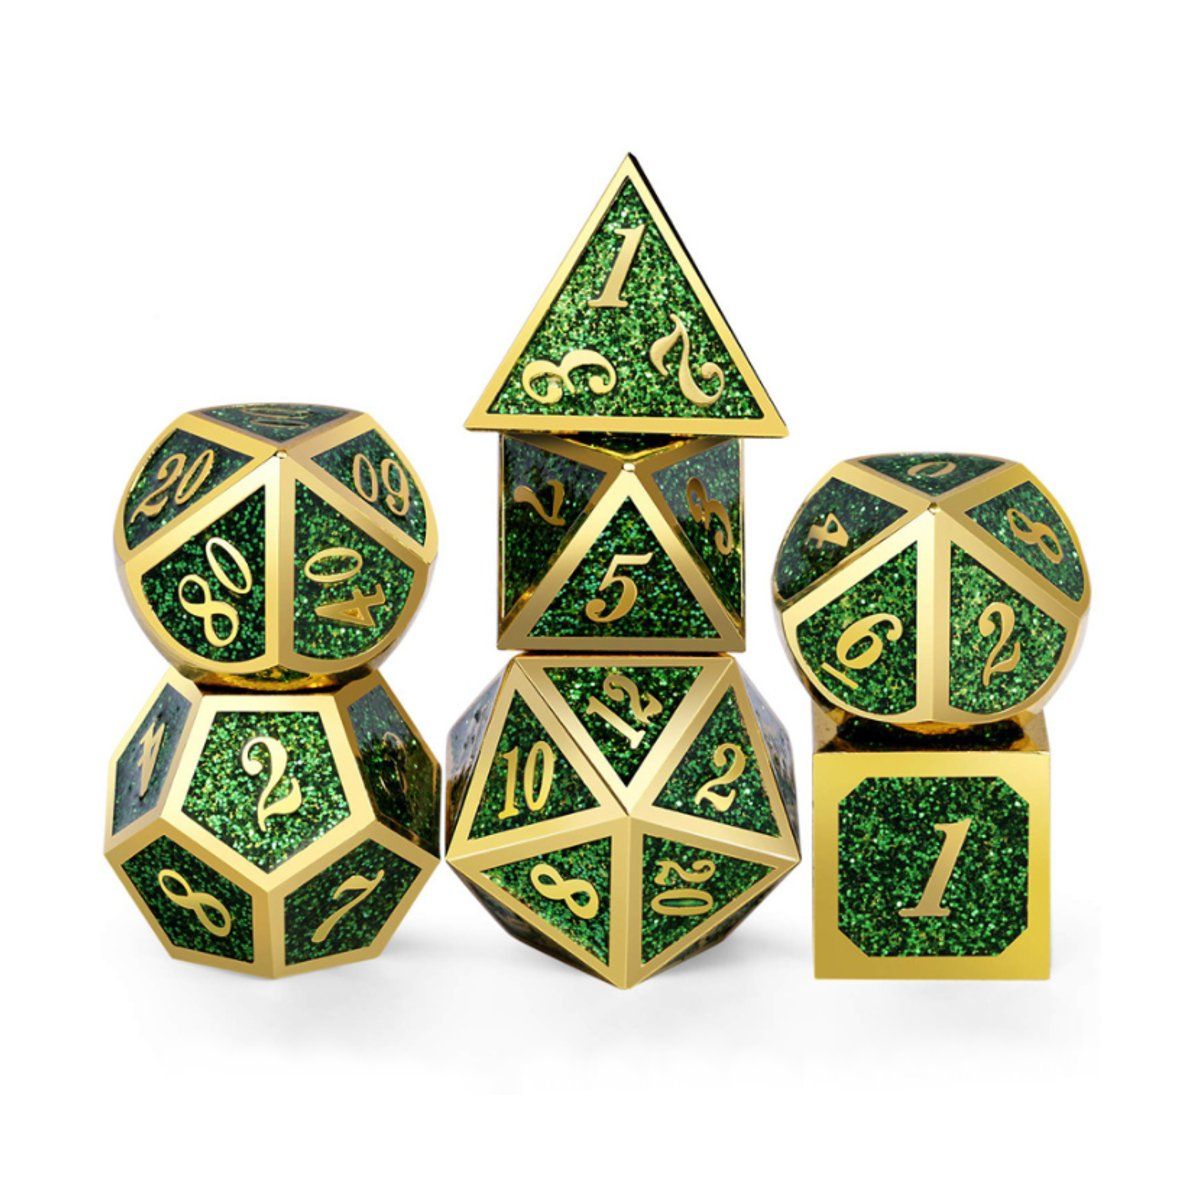 7pcs-Polyhedral-Dice-Zinc-Alloy-Dice-Set-Heavy-Duty-Dices-For-Role-Playing-Game-Dice-Set-1590750